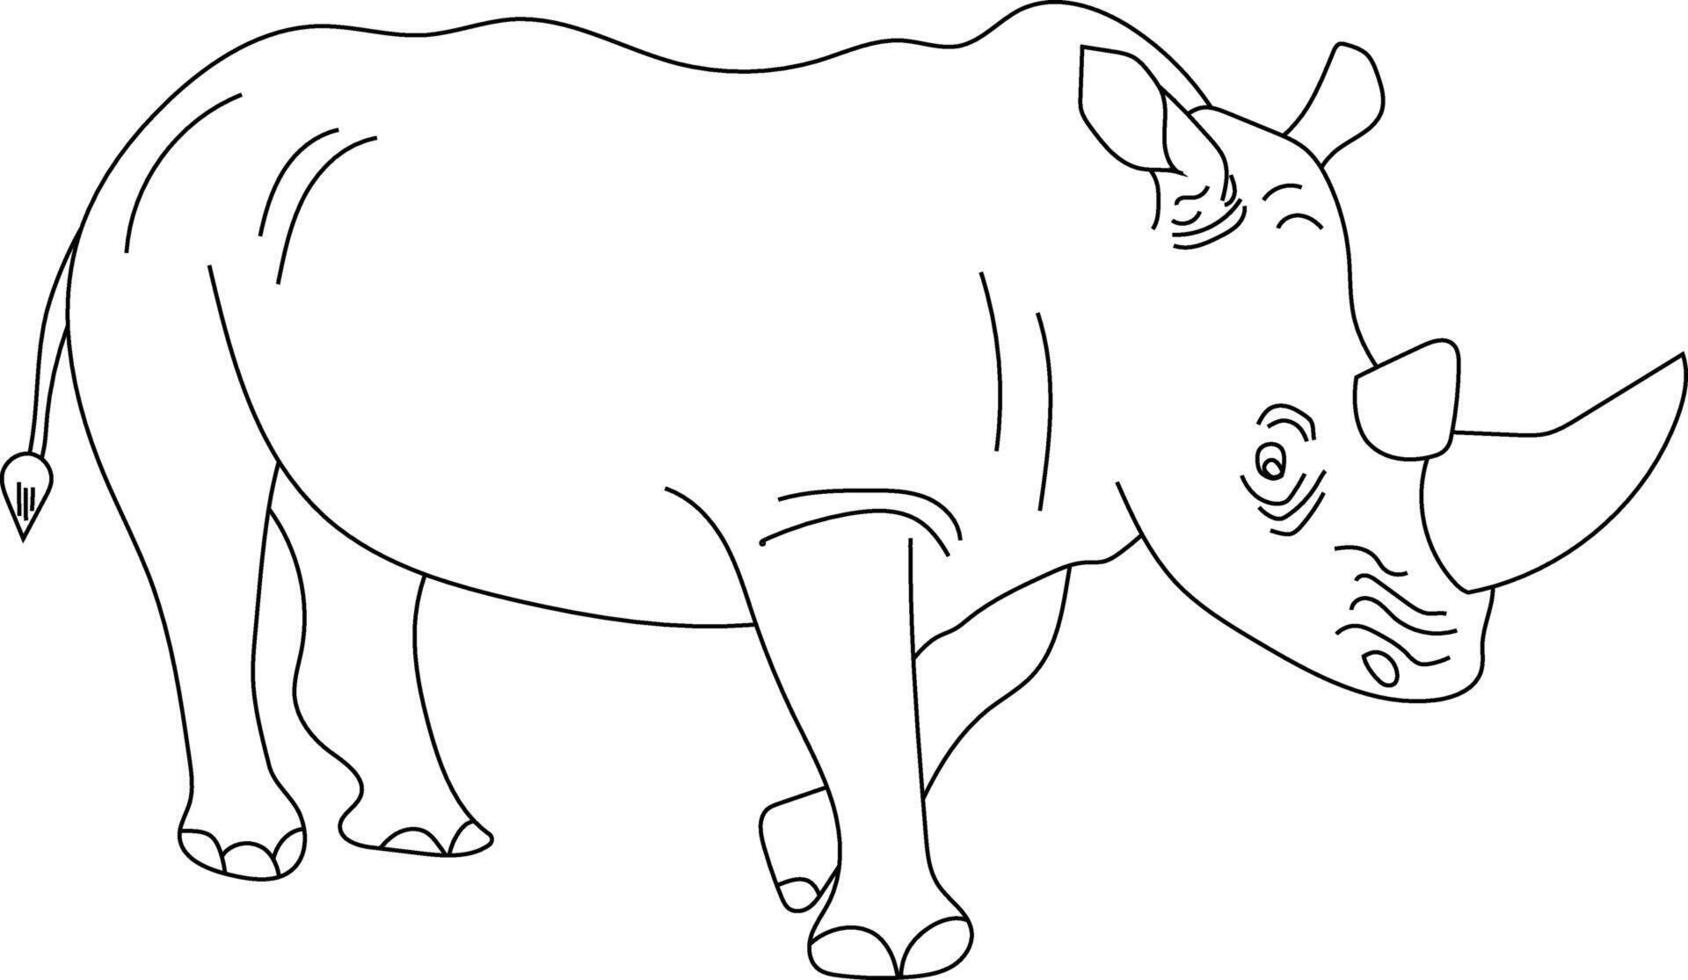 Outline Rhino Clipart. Doodle Animals Clipart. Cartoon Wild Animals Clipart for Lovers of Wildlife vector